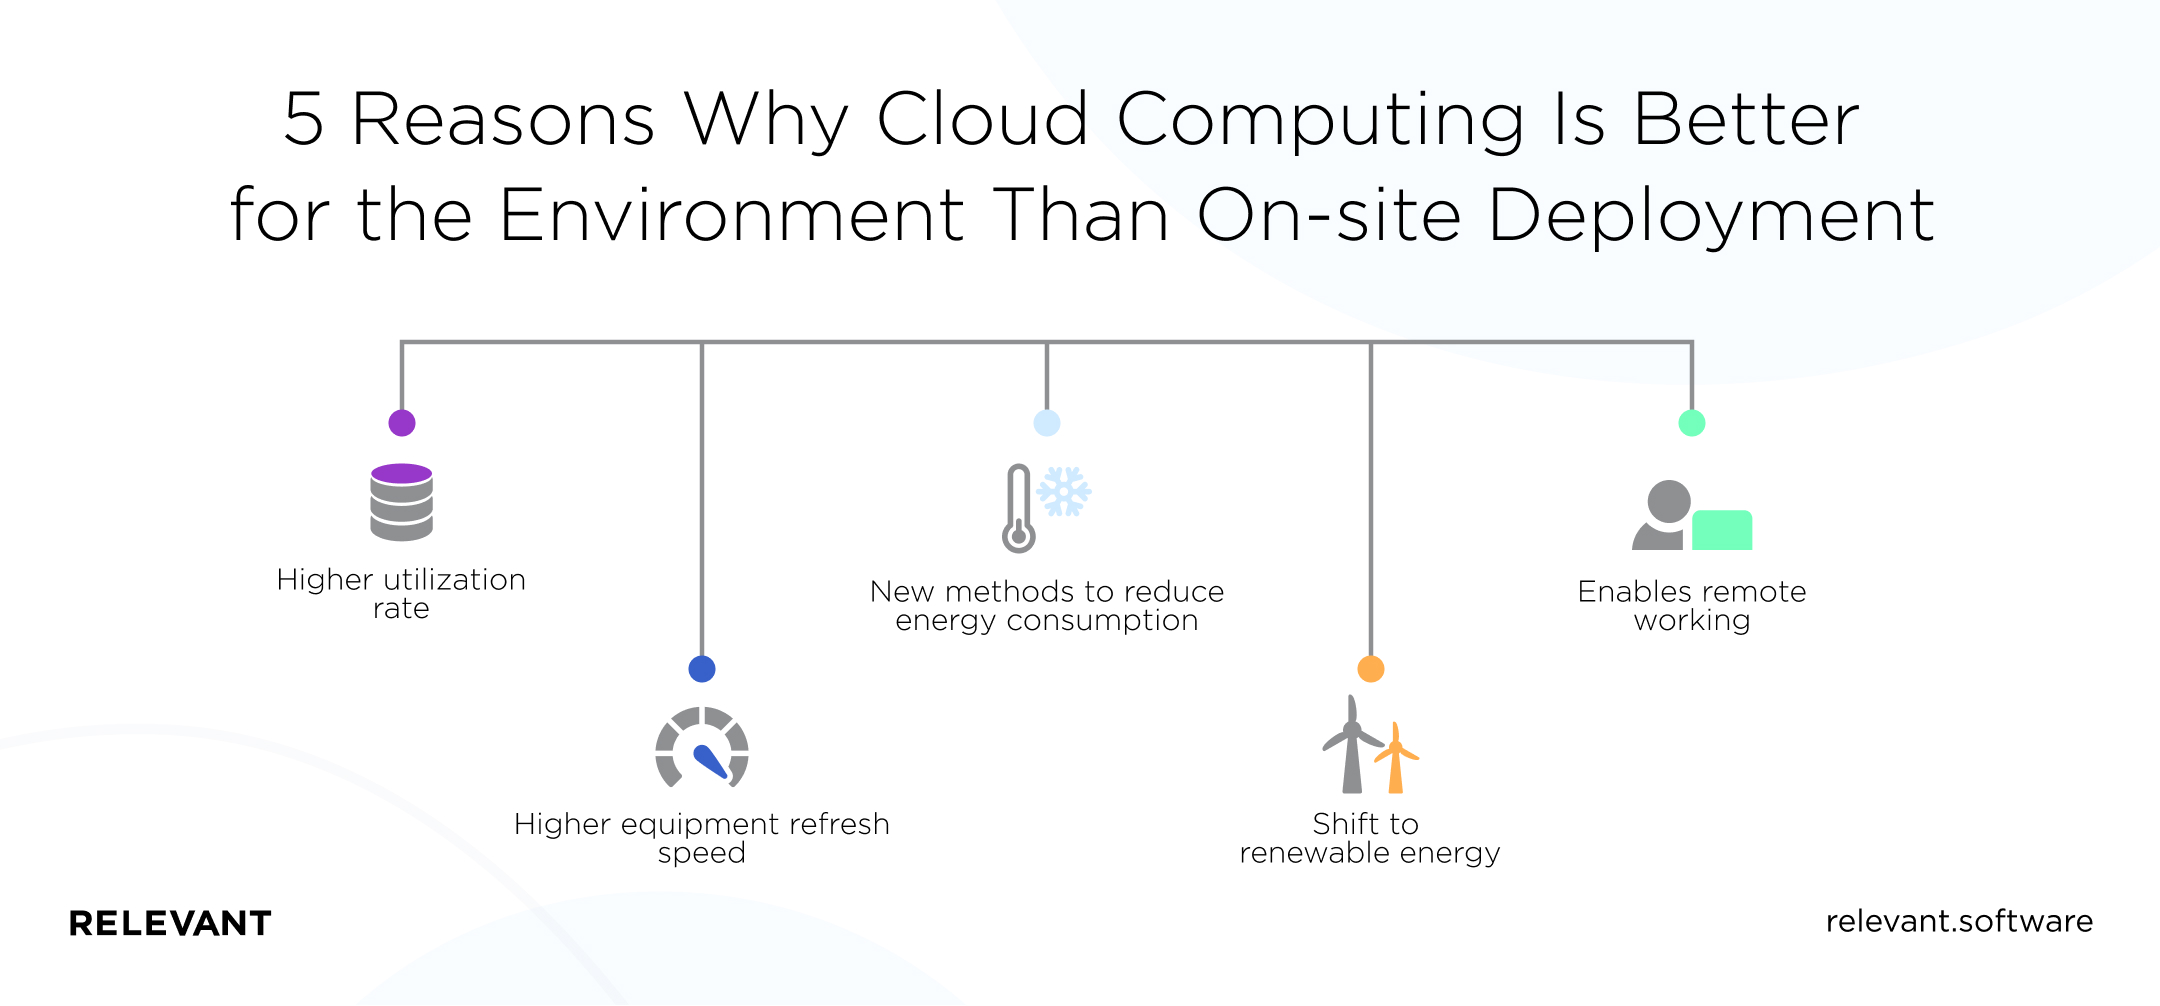 5 Reasons Why Cloud Computing Is Better for the Environment Than On-site Deployment